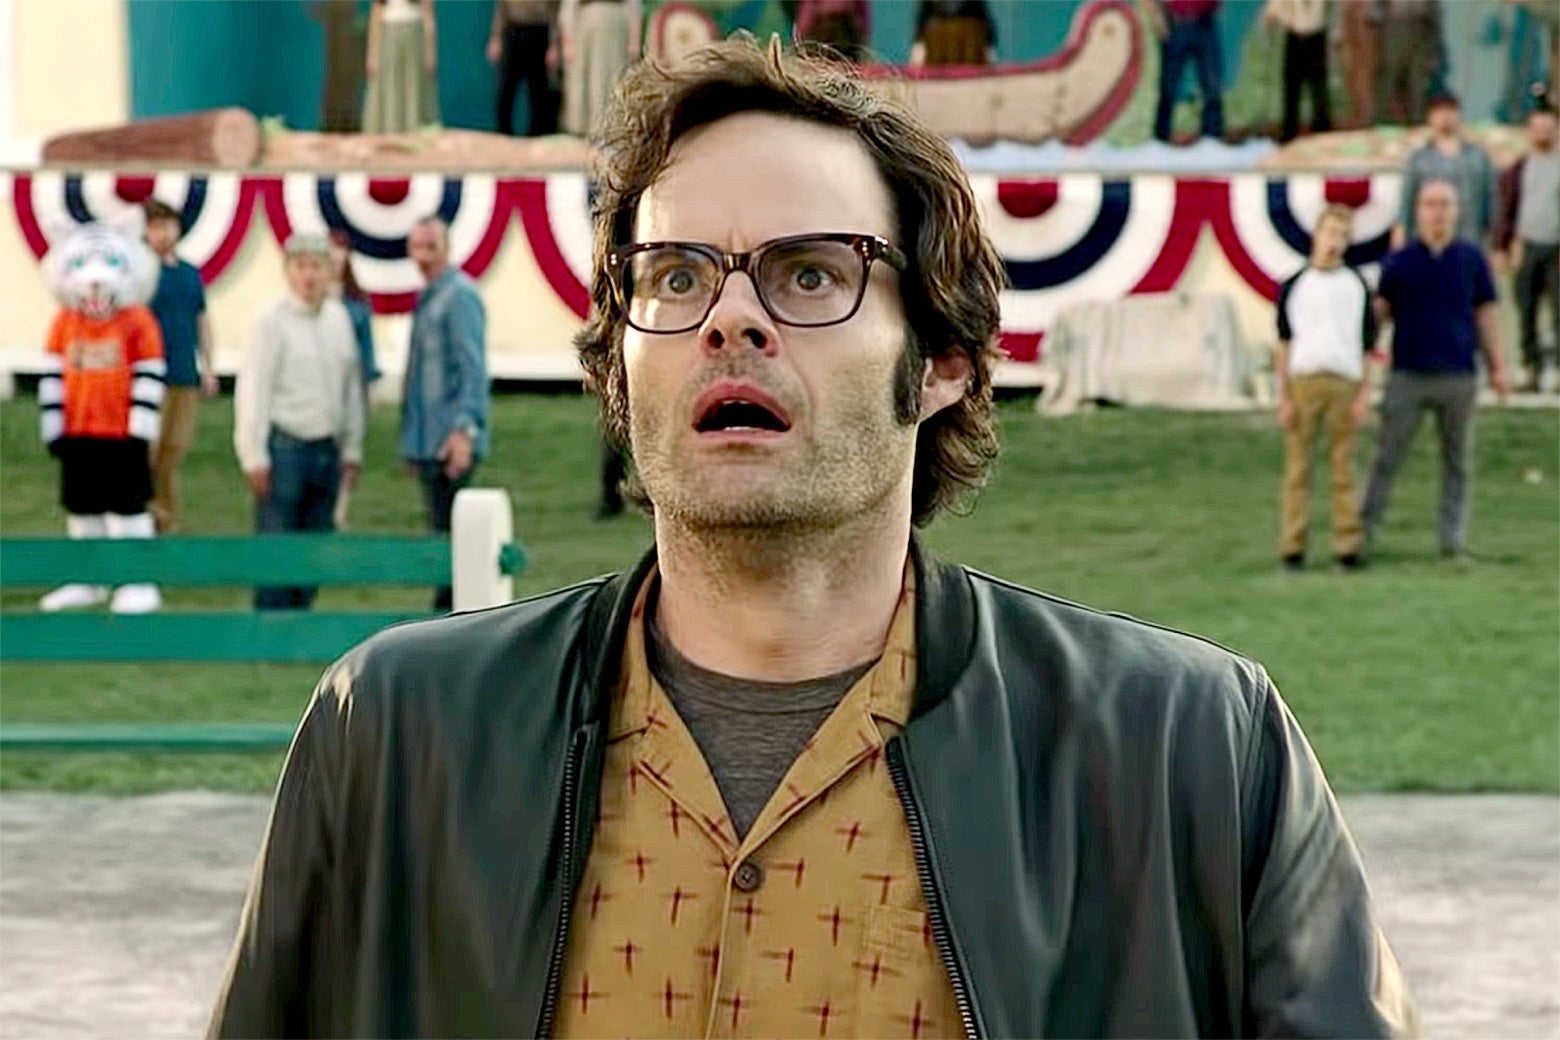 Bill Hader’s looks up as if in surprise/horror.